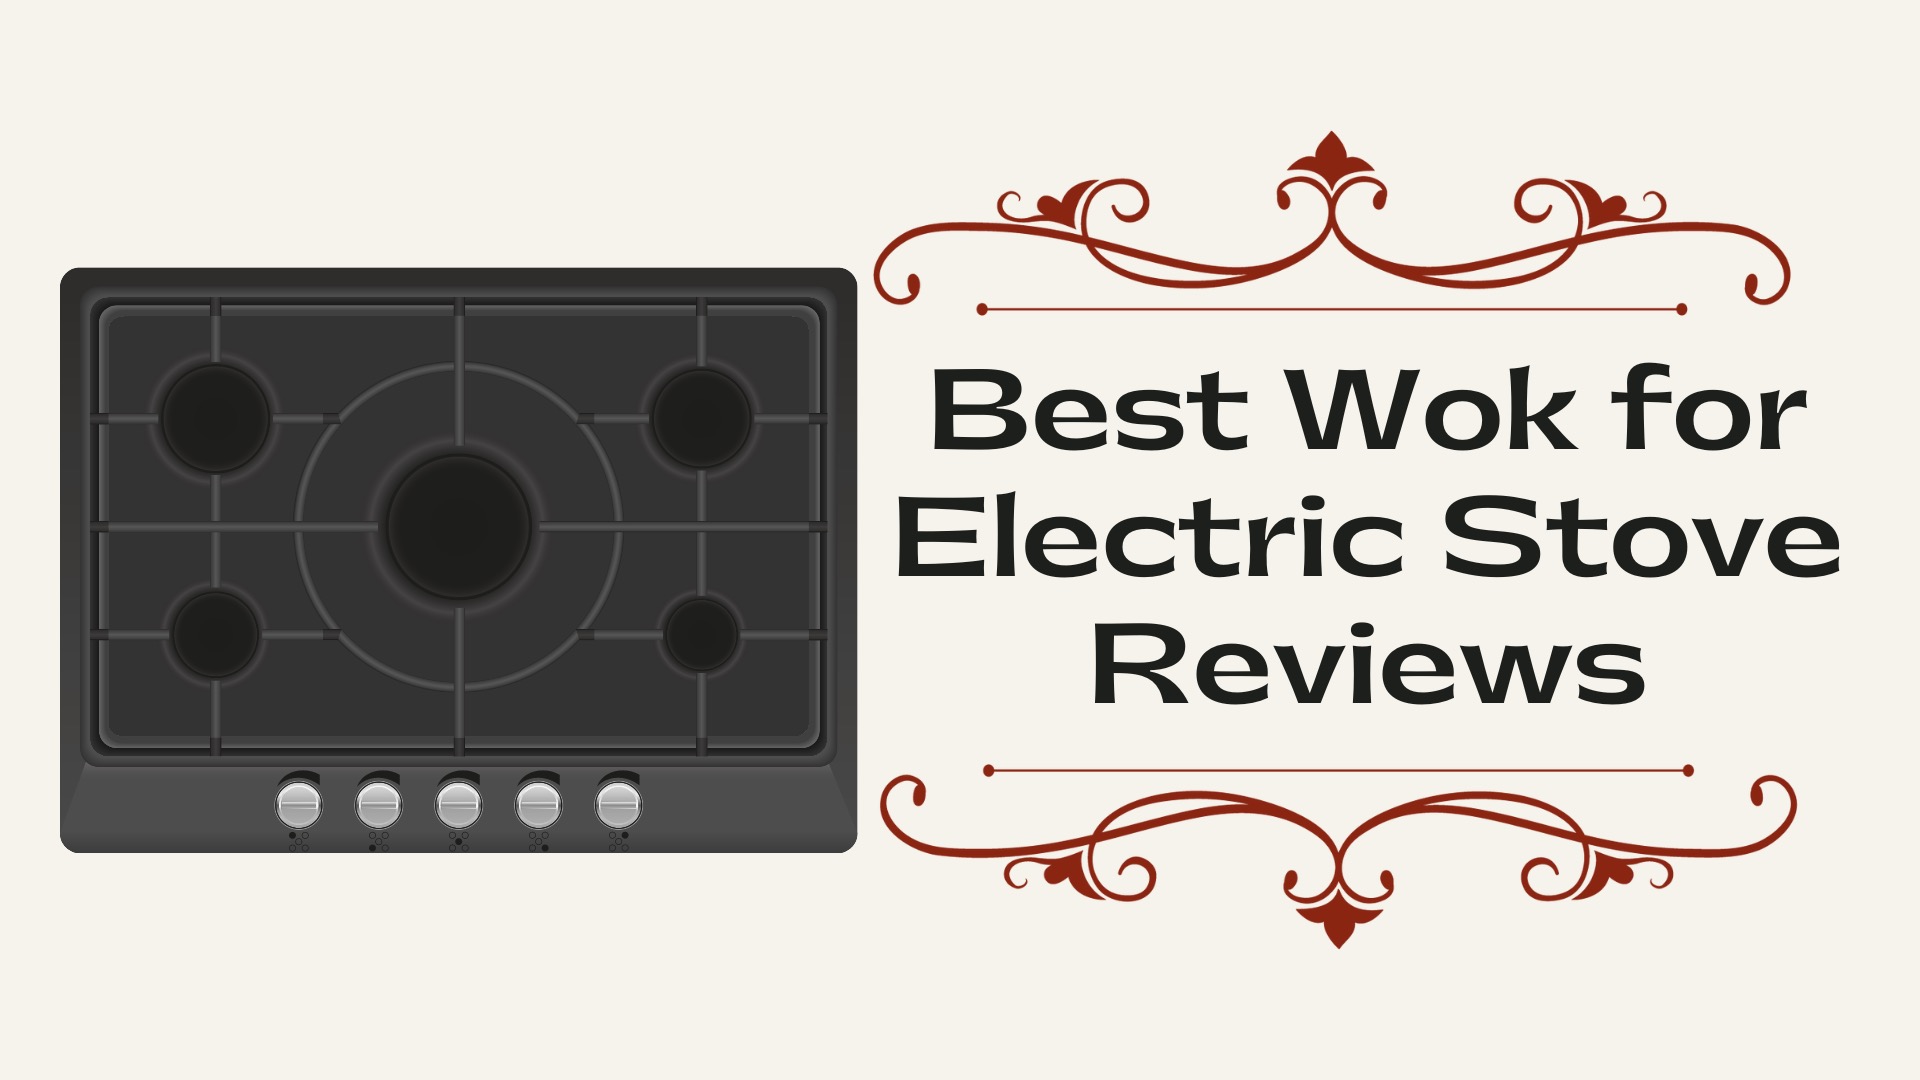 Best Wok for Electric Stove Reviews